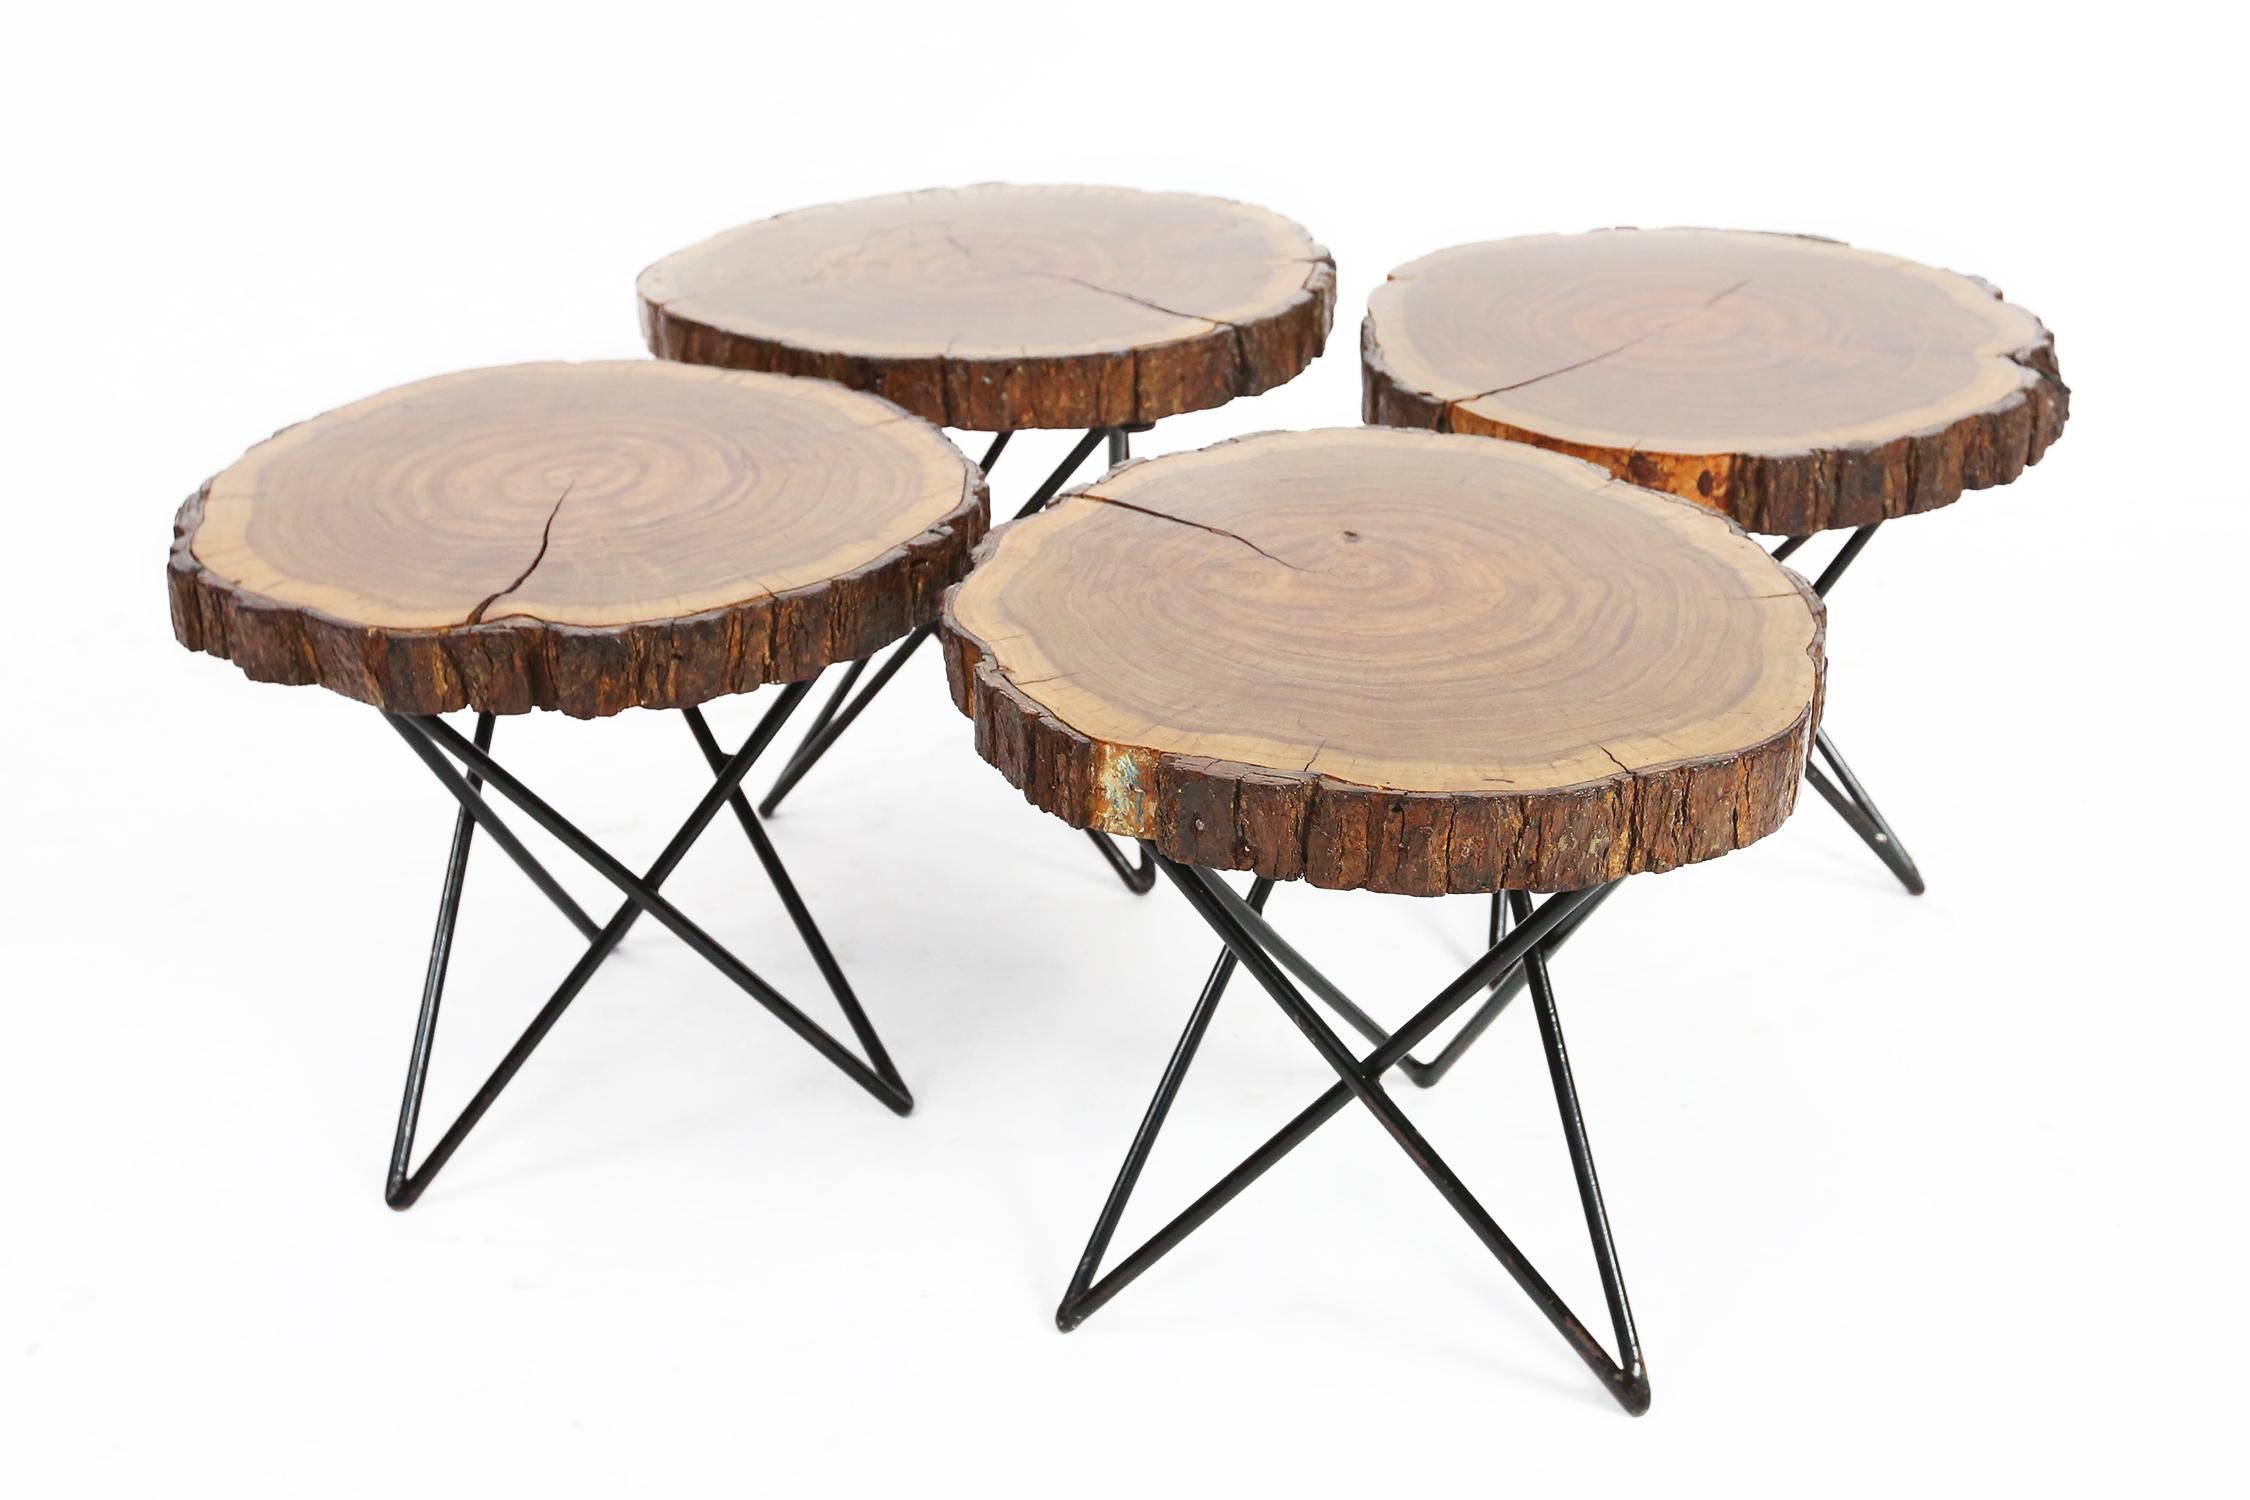 Side tables with original 1950s metal hairpin legs, probably in magnolia wood
4 pieces available, diameter of the wood varies between 35 and 40 cm diameter.